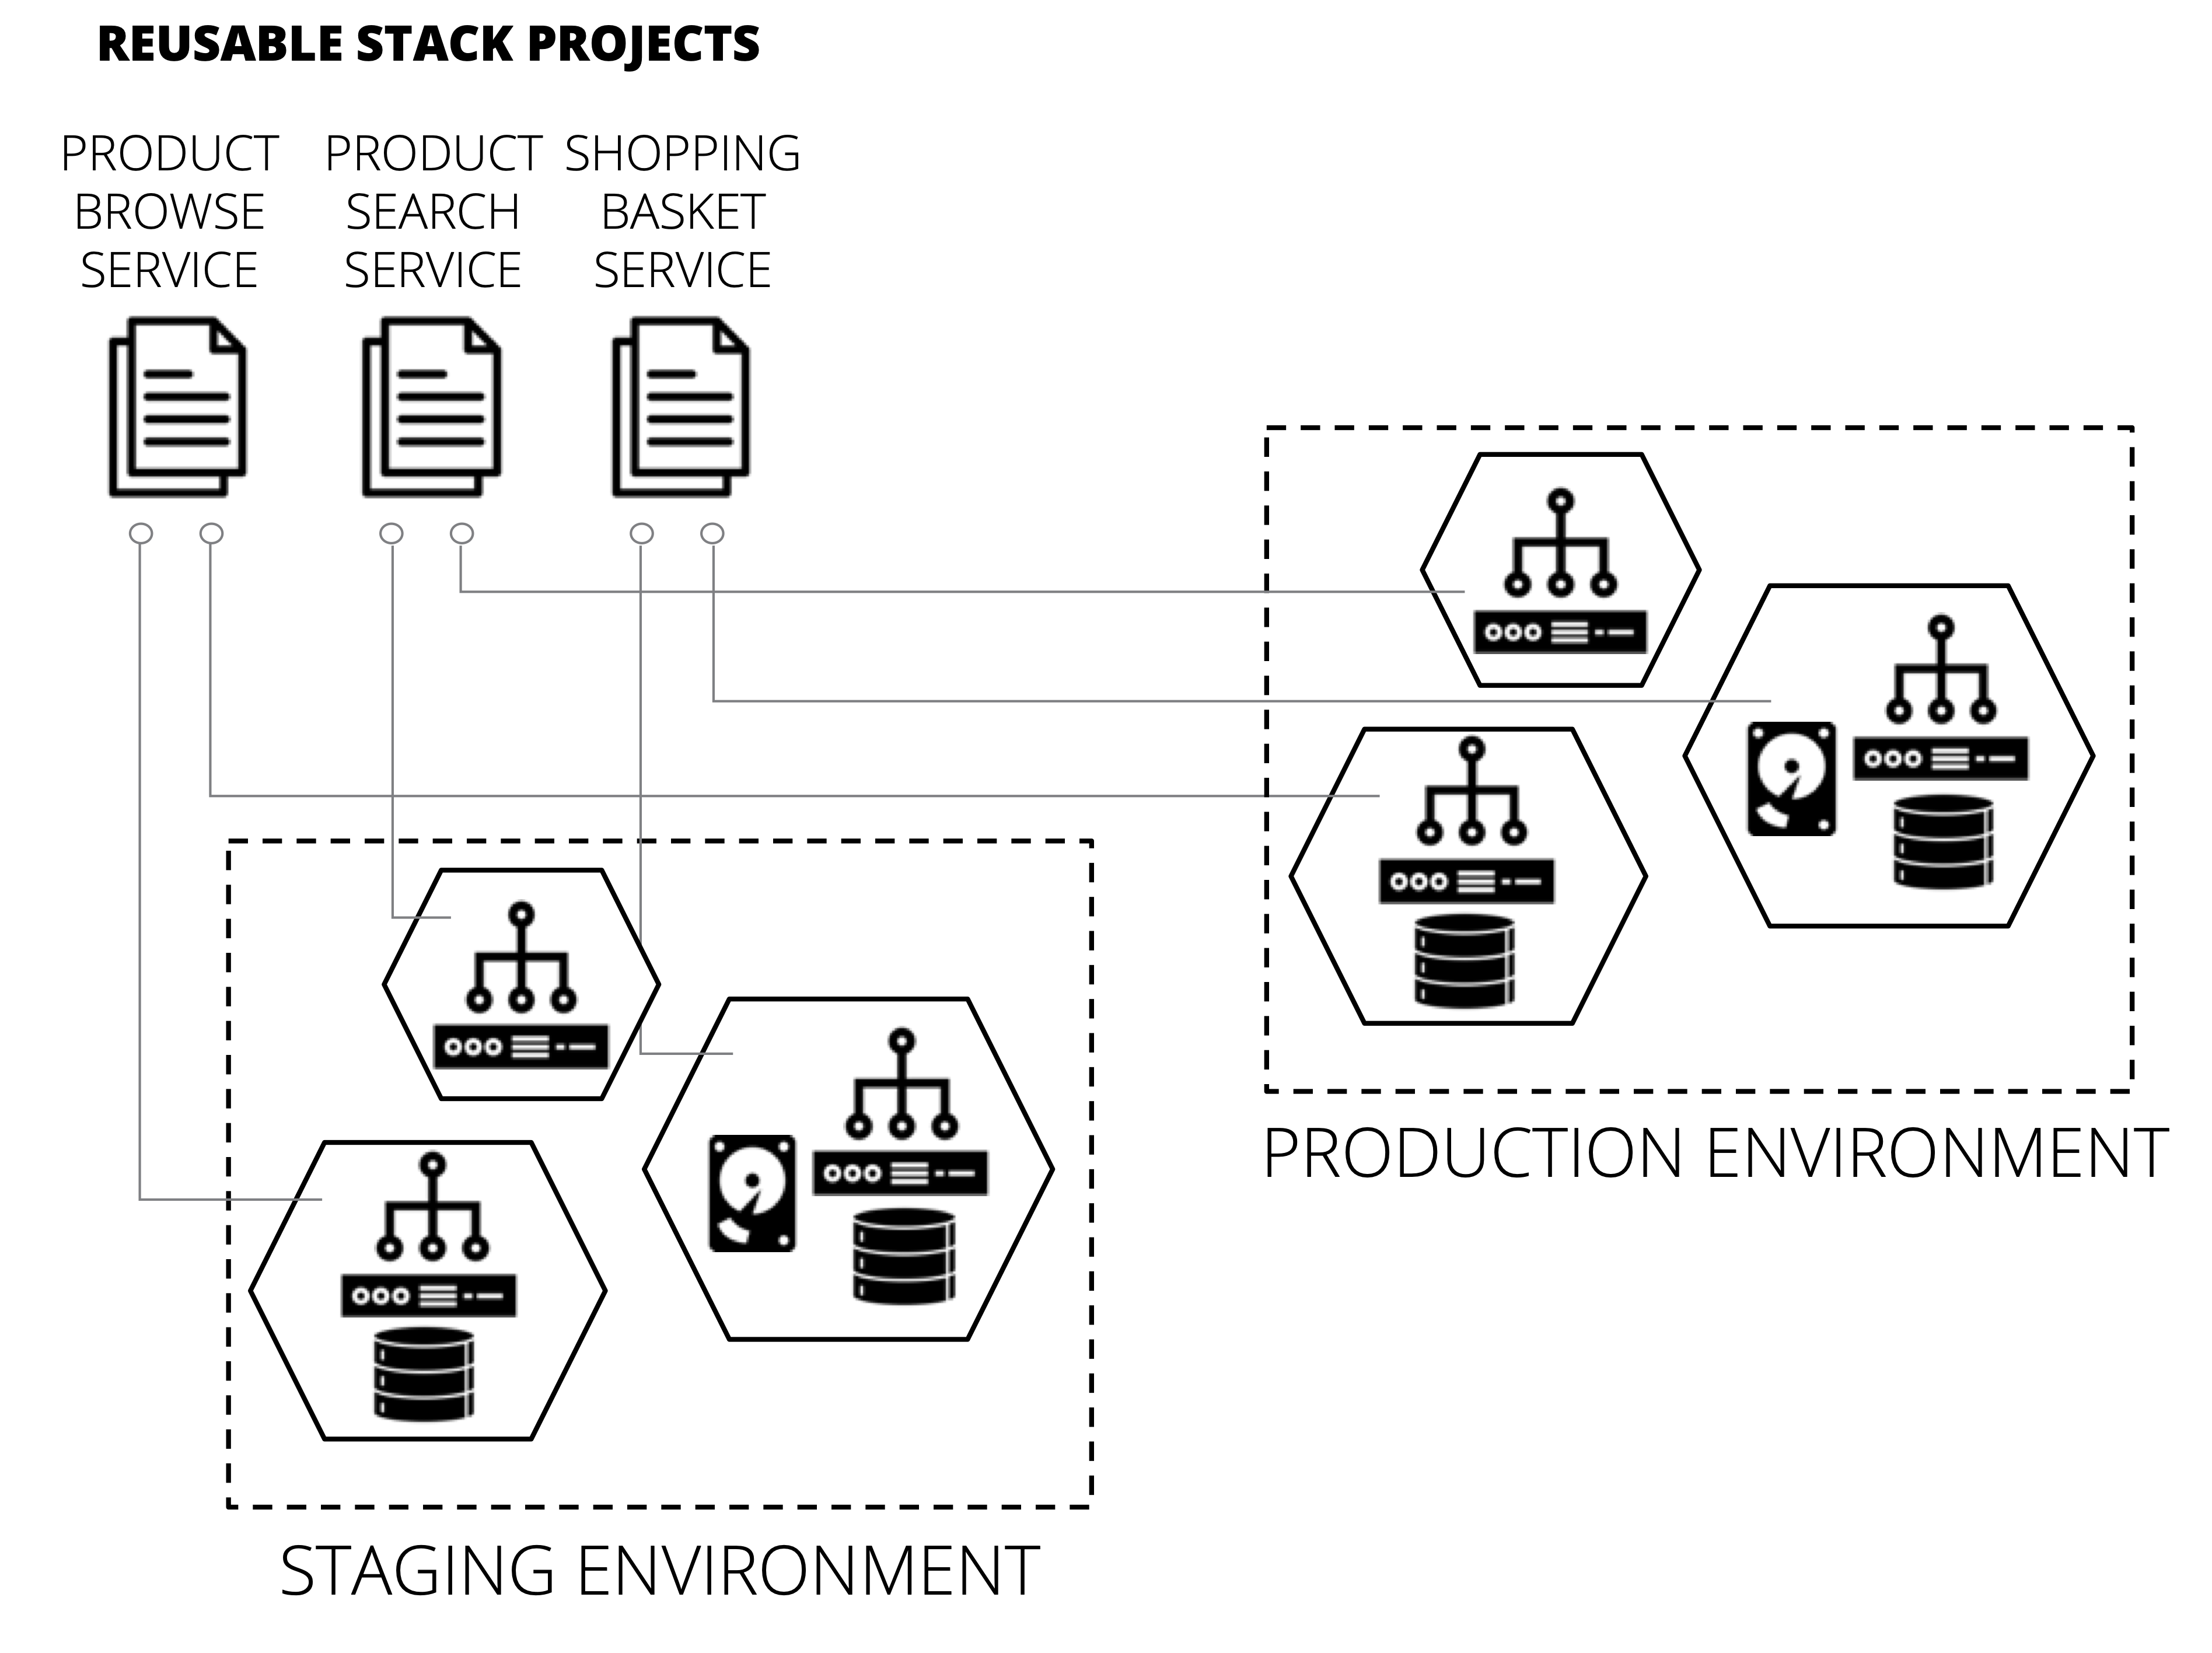 Using multiple stacks to build each environment.